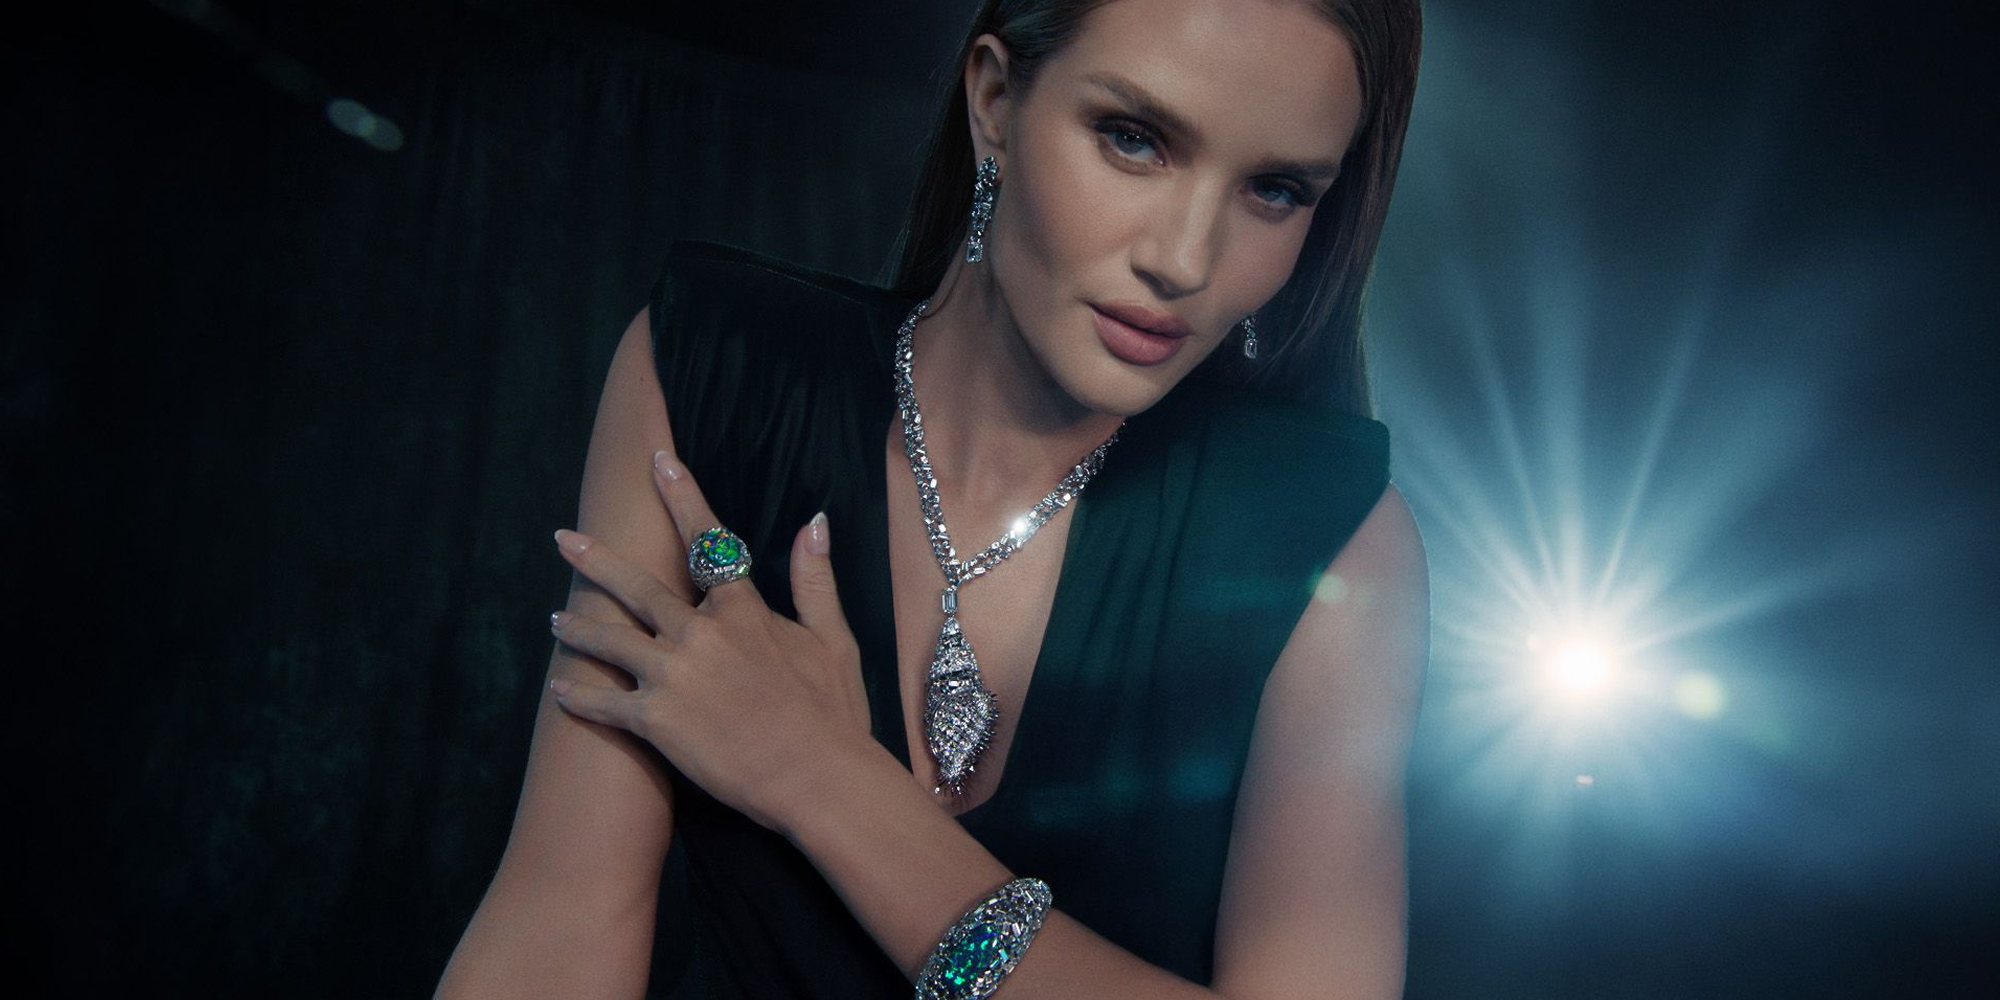 TIFFANY & CO 2023 BLUE BOOK HIGH JEWELRY CAMPAIGN FILM STARRING ROSIE HUNTINGTON WHITELEY